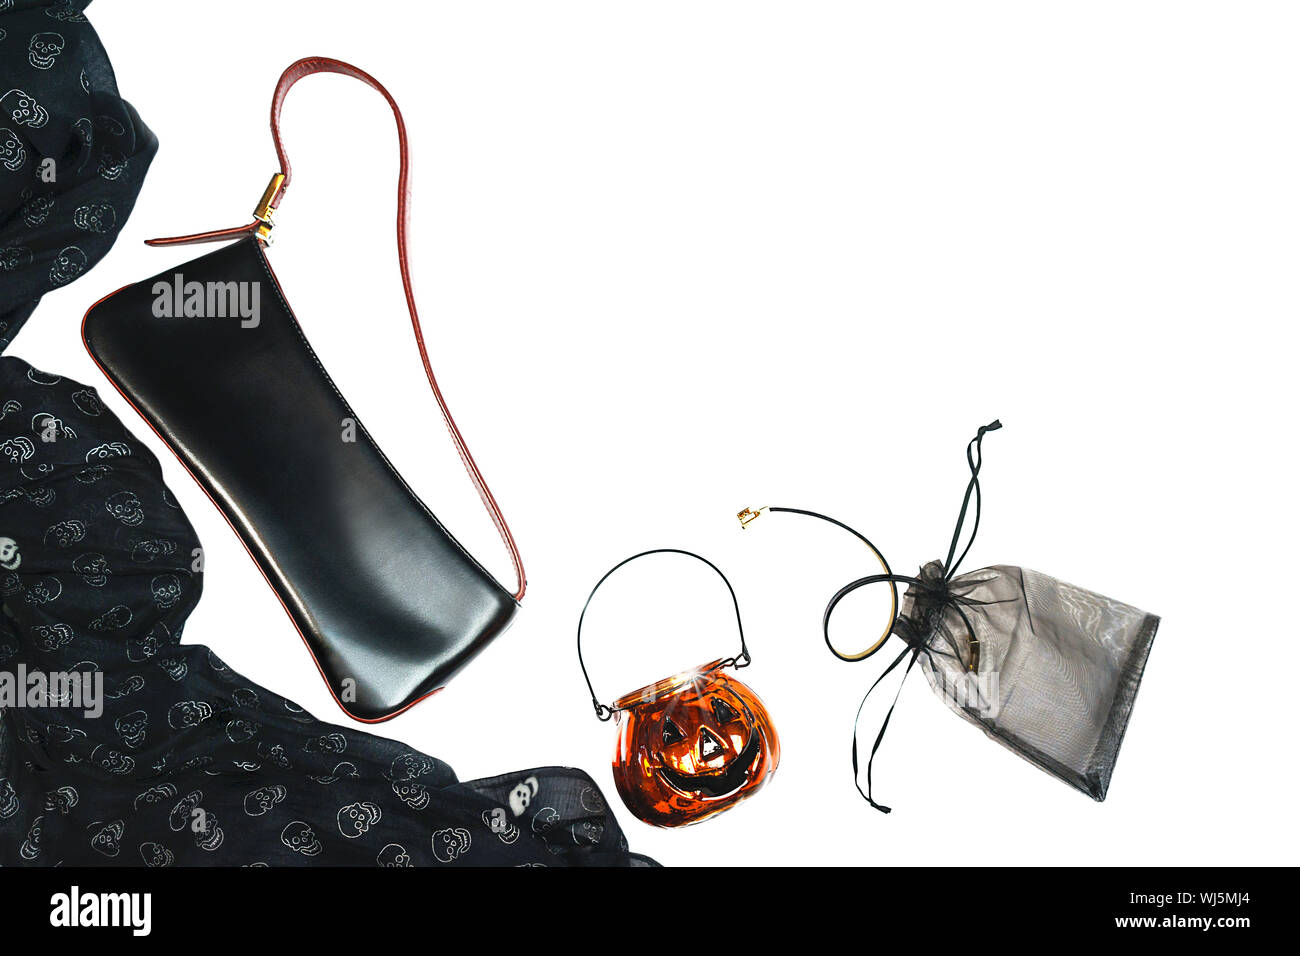 Halloween party female outfit layout of accessories black on white background: shoes, handbag, cloth with skulls, jewelry and glass pumpkin. Stock Photo